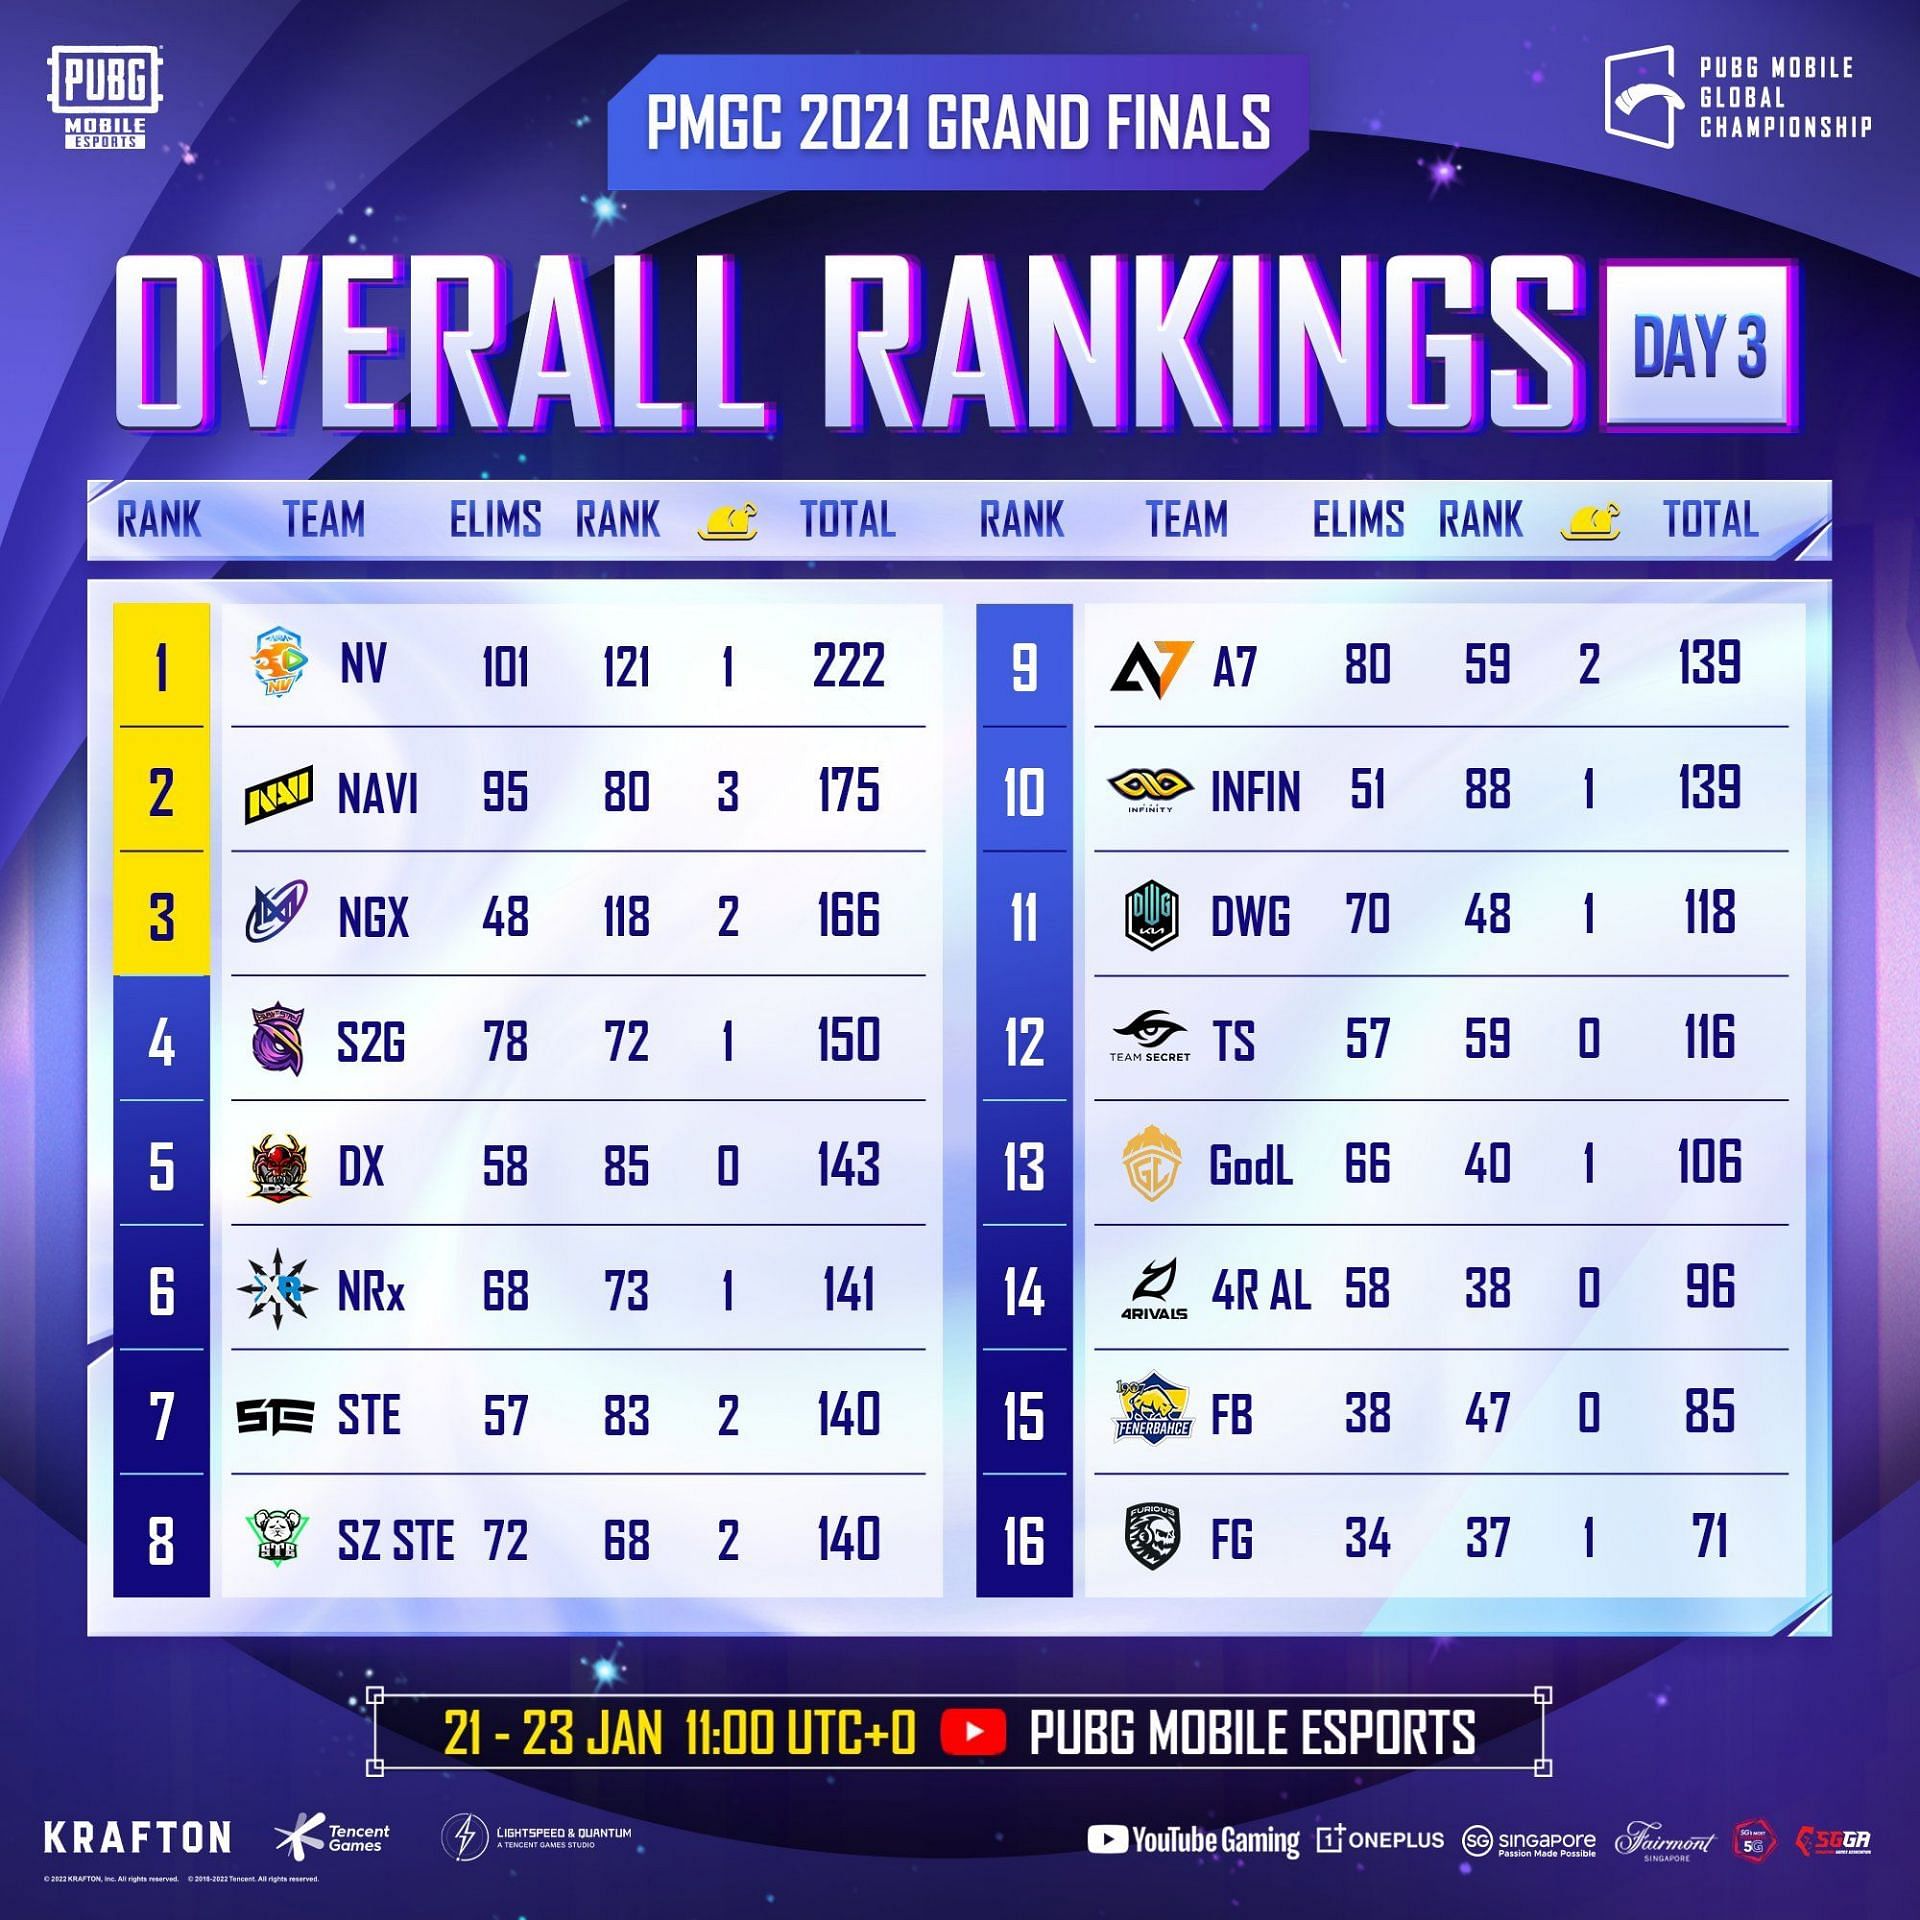 Overall standings of PMGC Grand Finals (Image via PUBG Mobile)